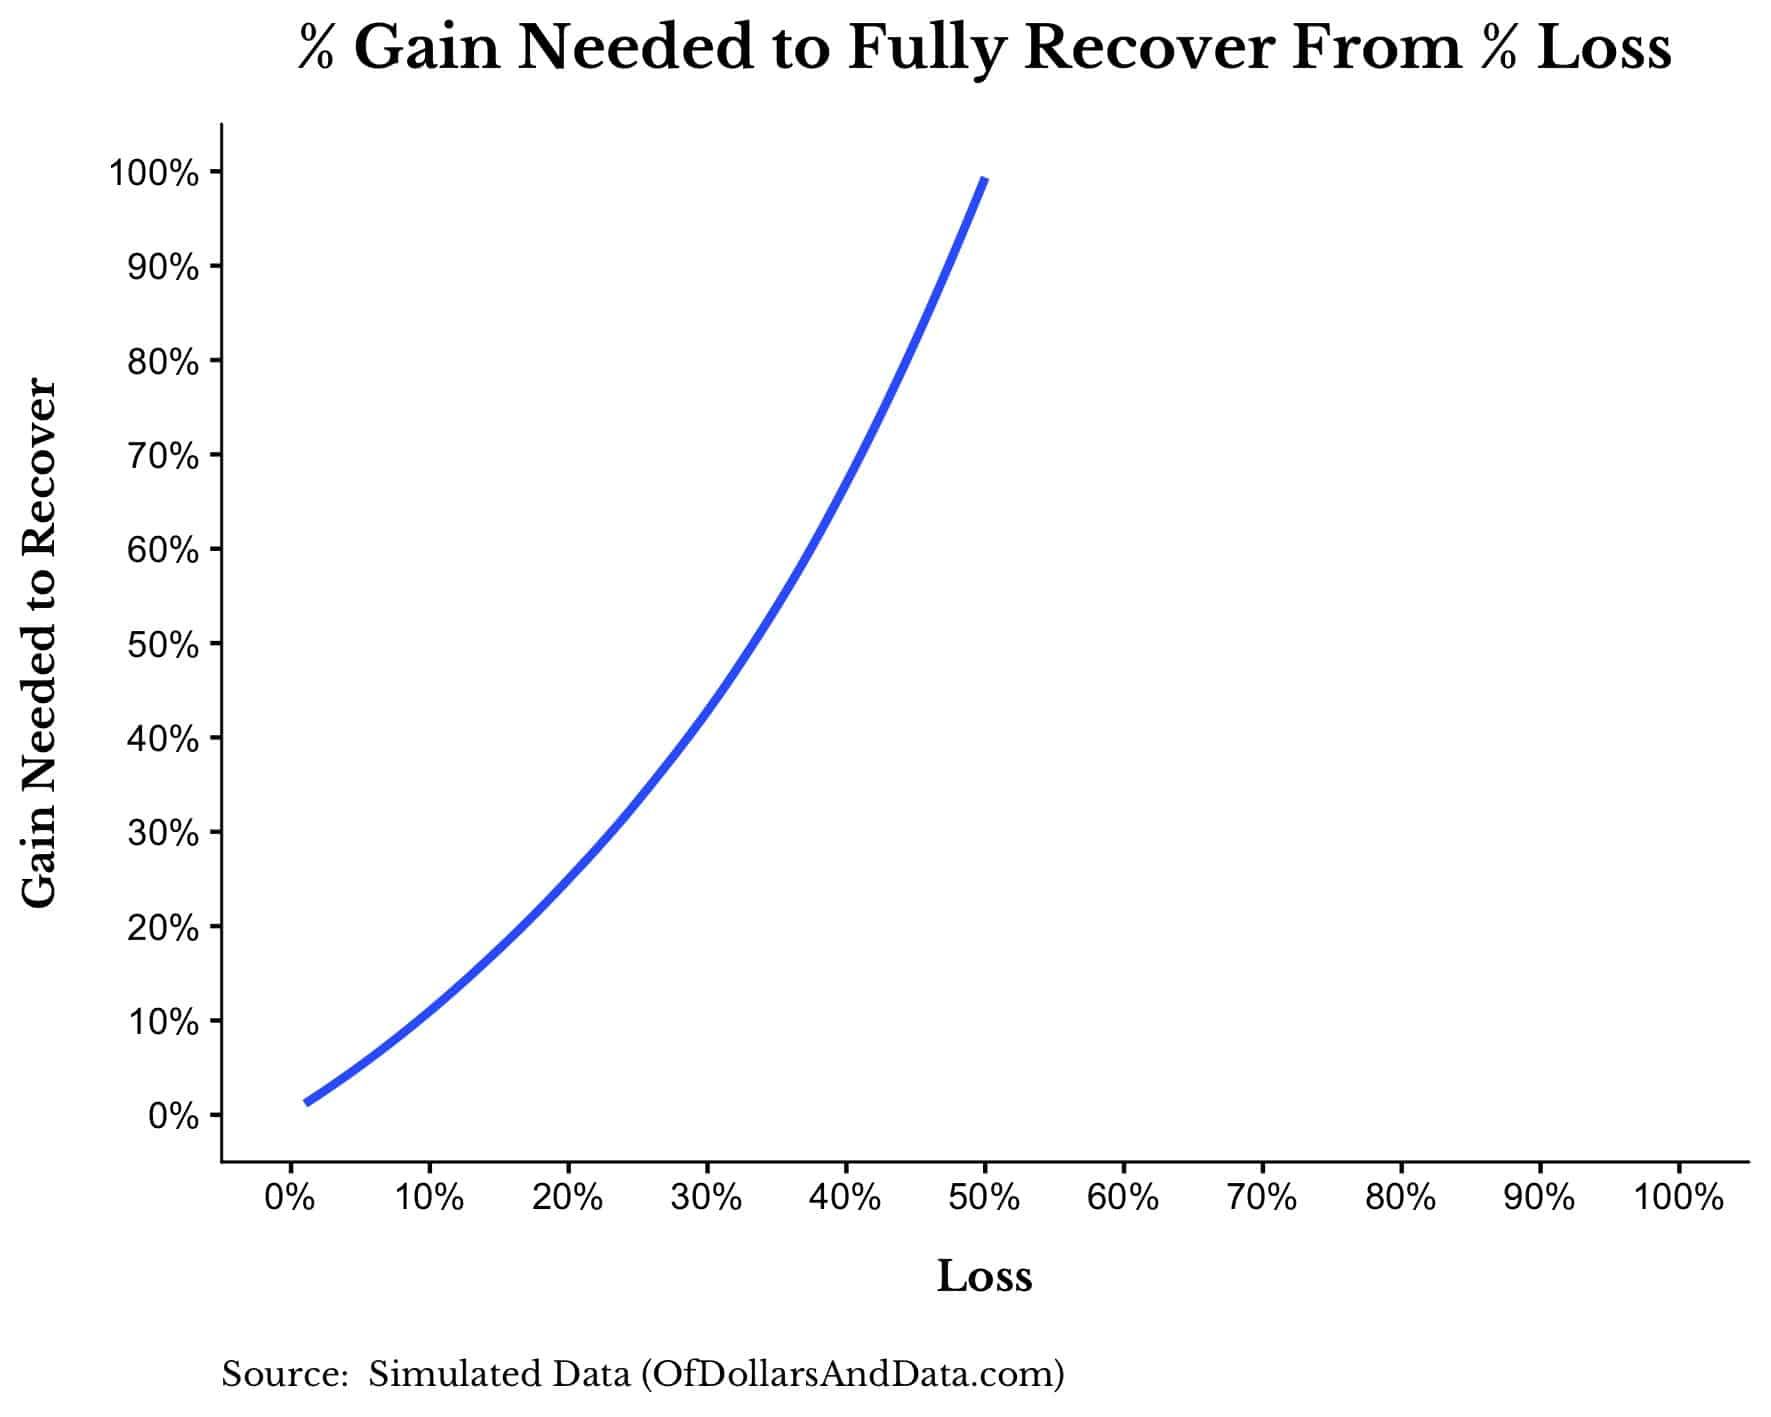 Percentage gain needed to fully recover from a percentage loss